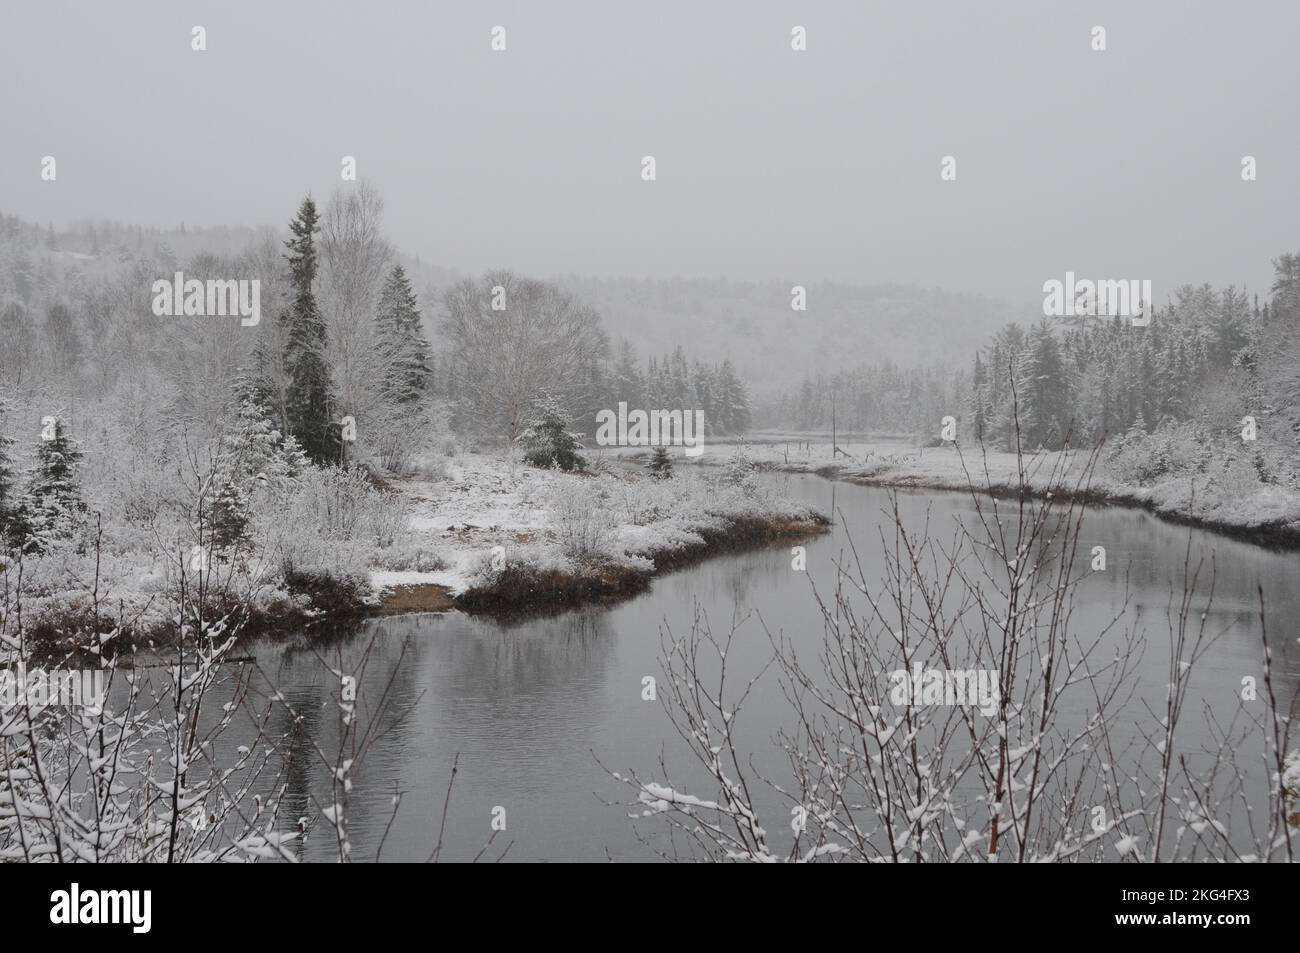 Winter scenery displaying its white blanket on trees, river and with a grey sky with a tranquillity feeling of peace. Horizontal Photo. Stock Photo